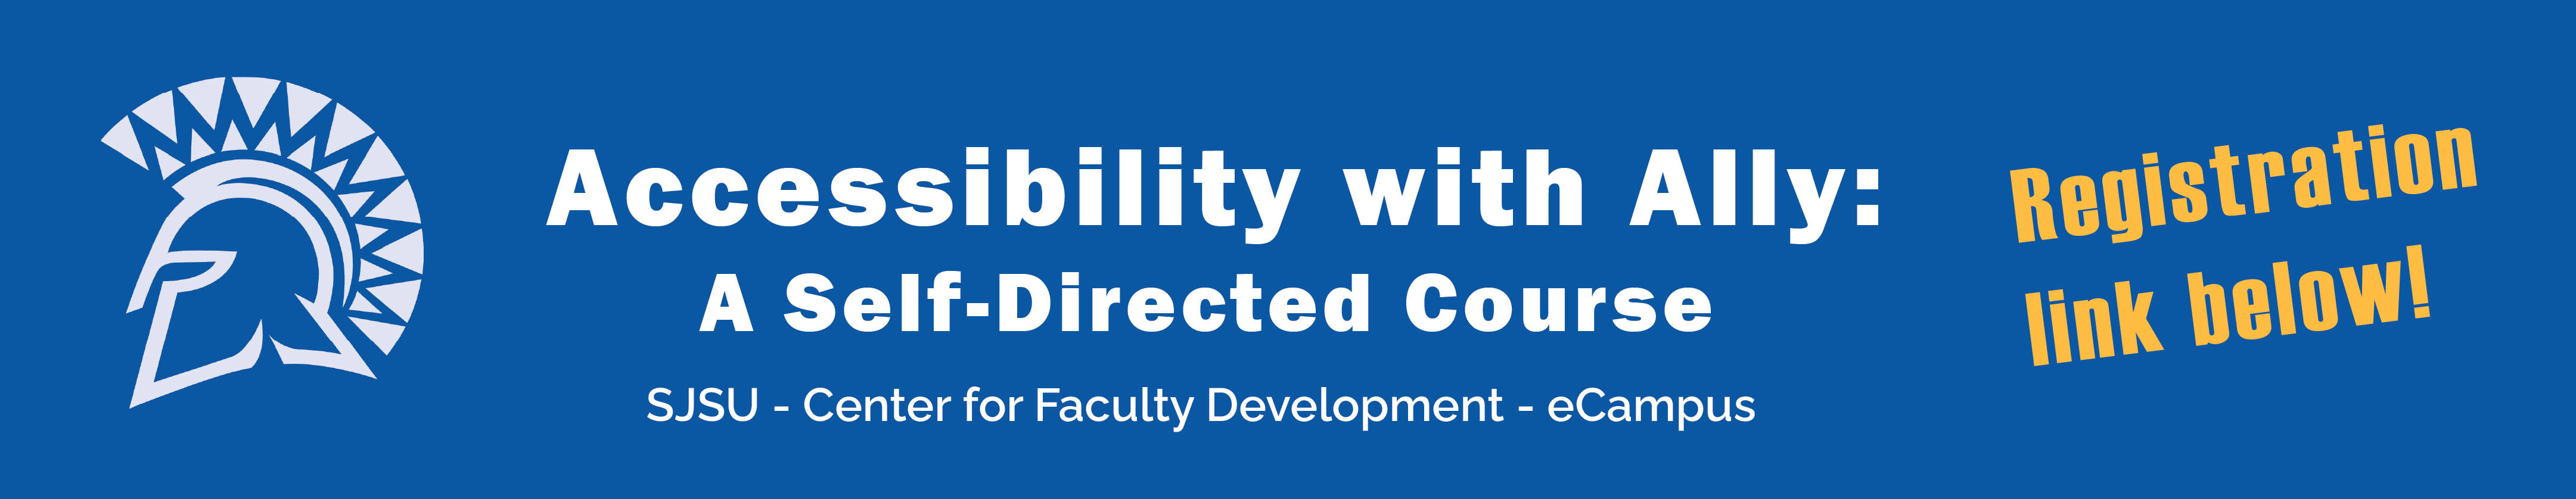 Accessibility with Ally Course Banner.png